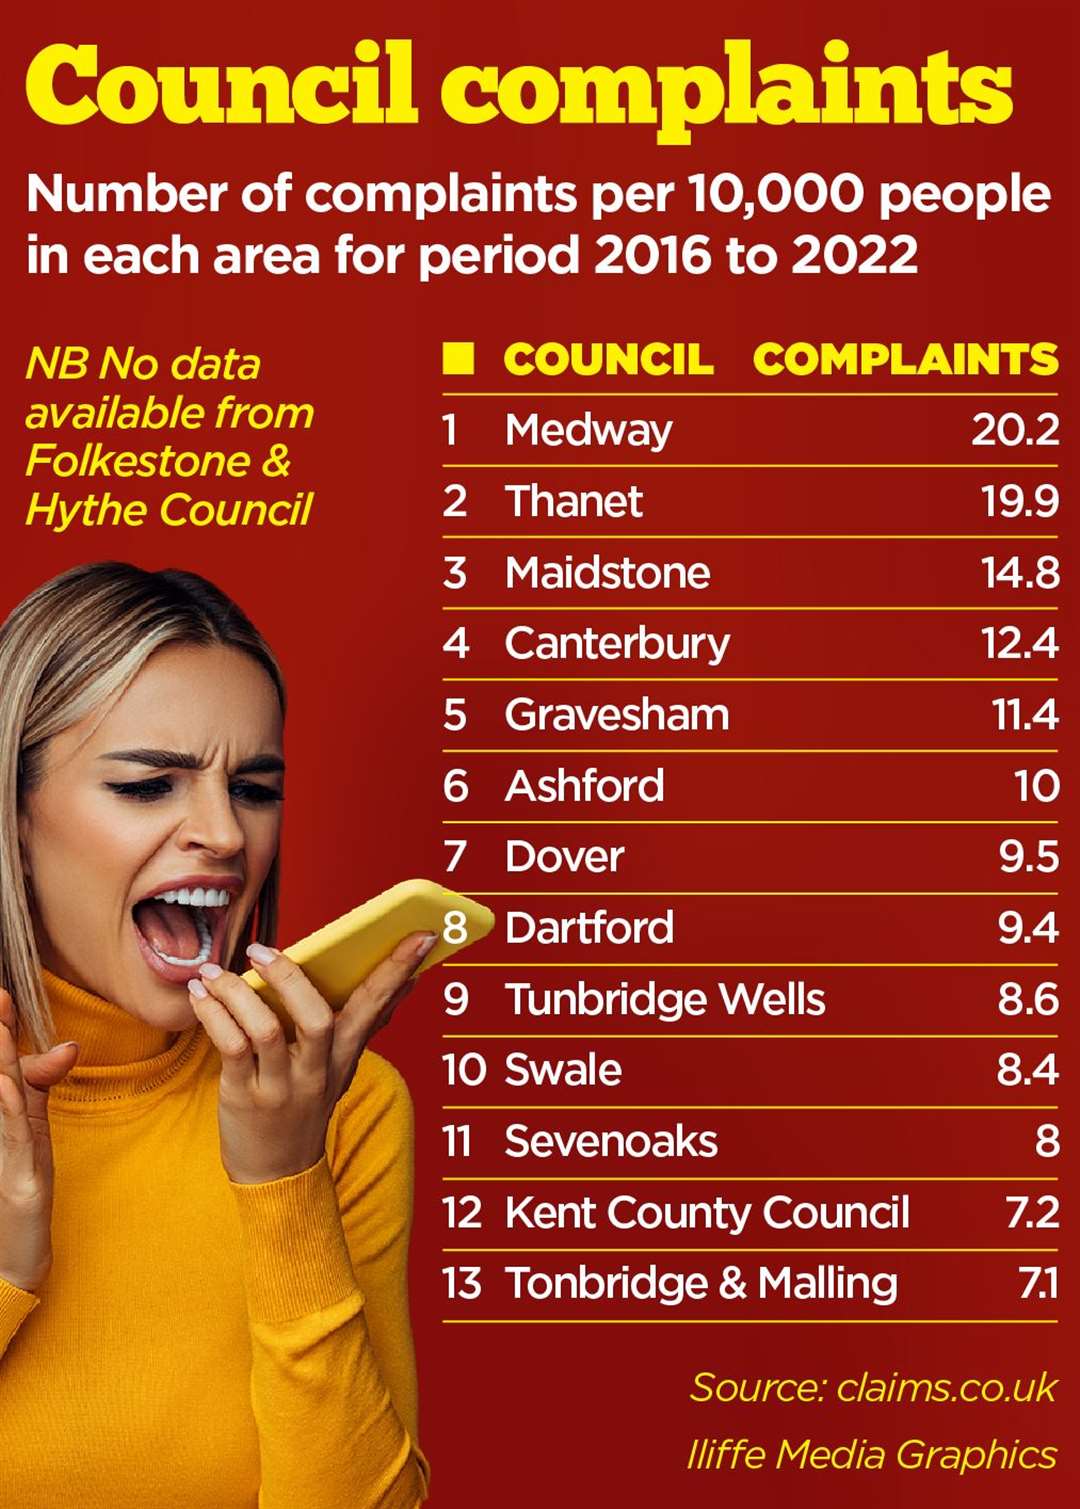 Medway topped the table for the most complaints per 10,000 residents